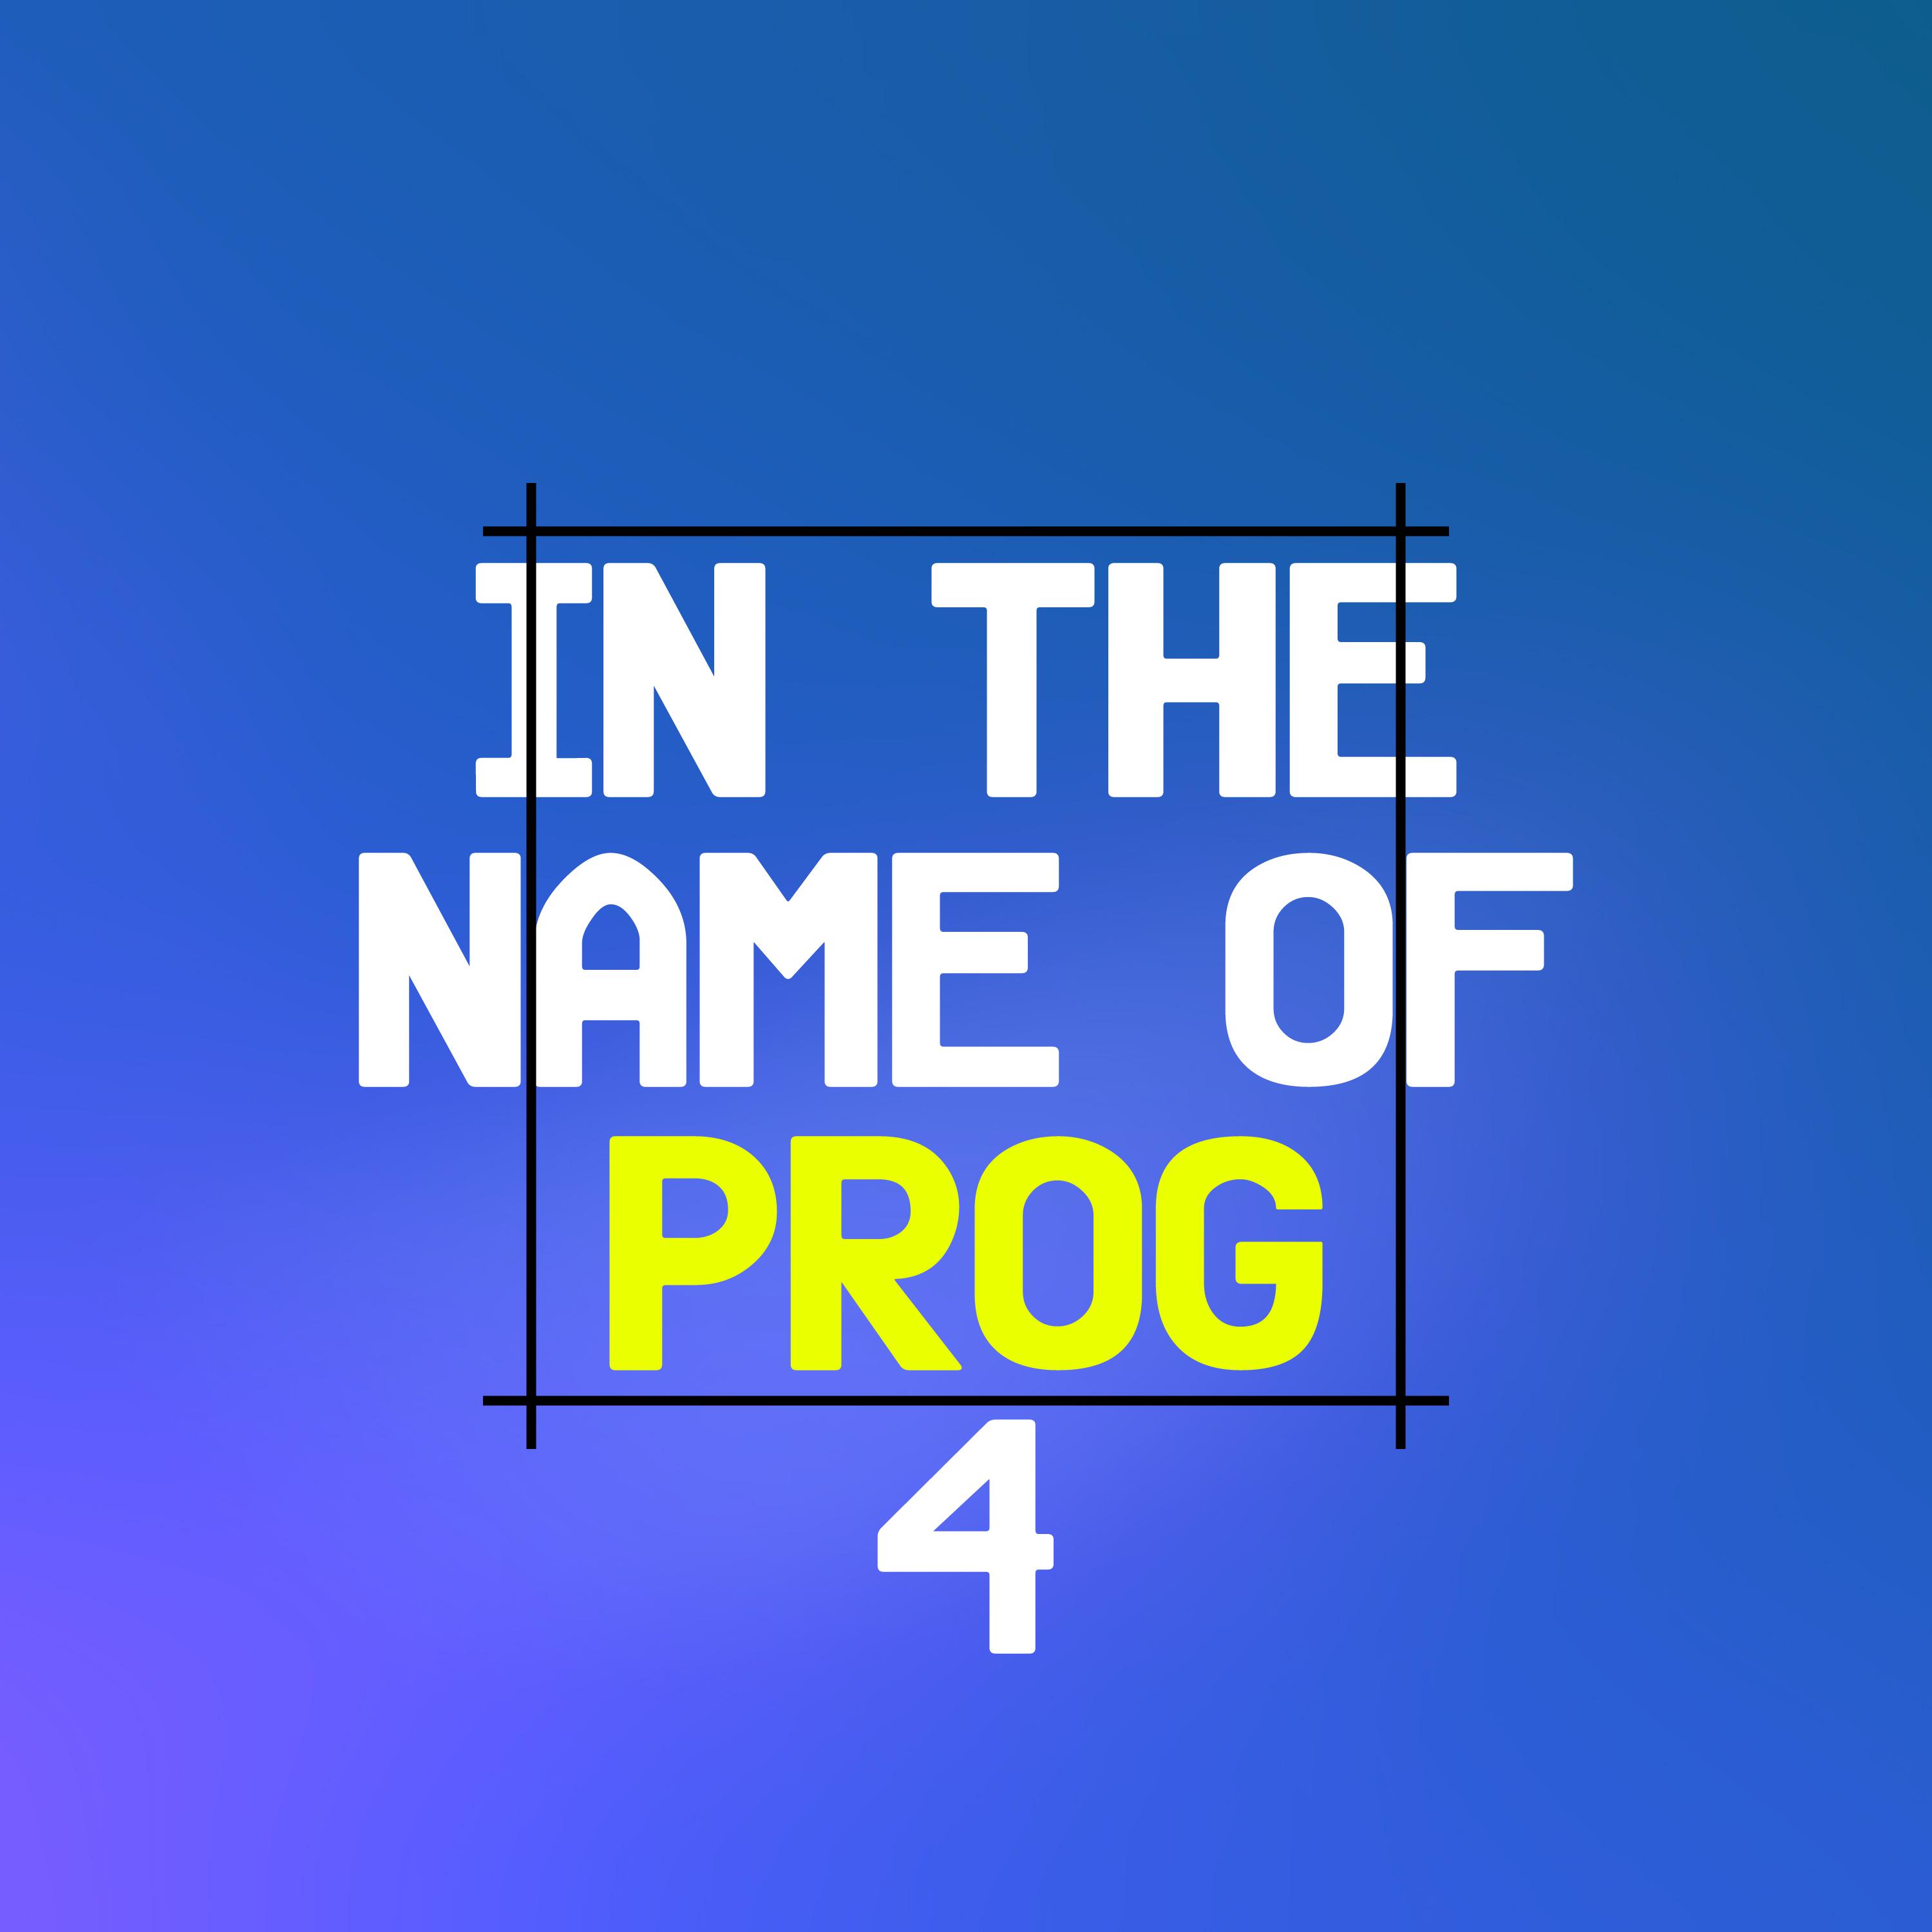 In The Name of Prog 4